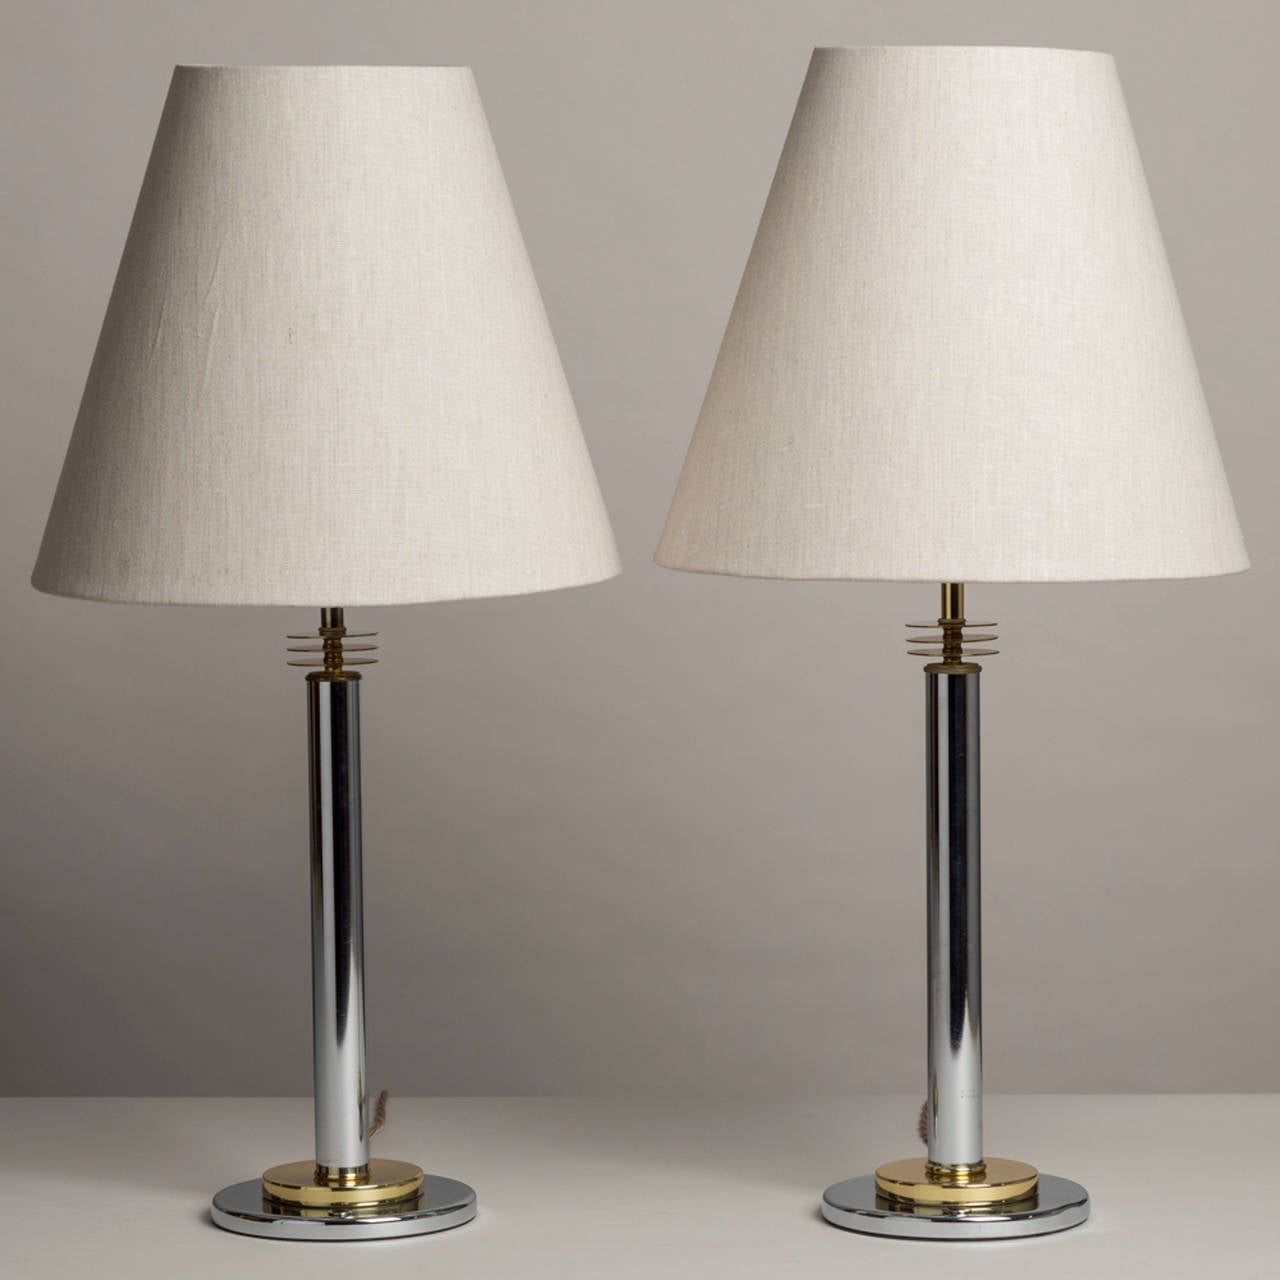 A pair of brass and nickel table lamps in the manner of Paul Evans.

Prices include 20% VAT which is removed for items shipped outside the EU.